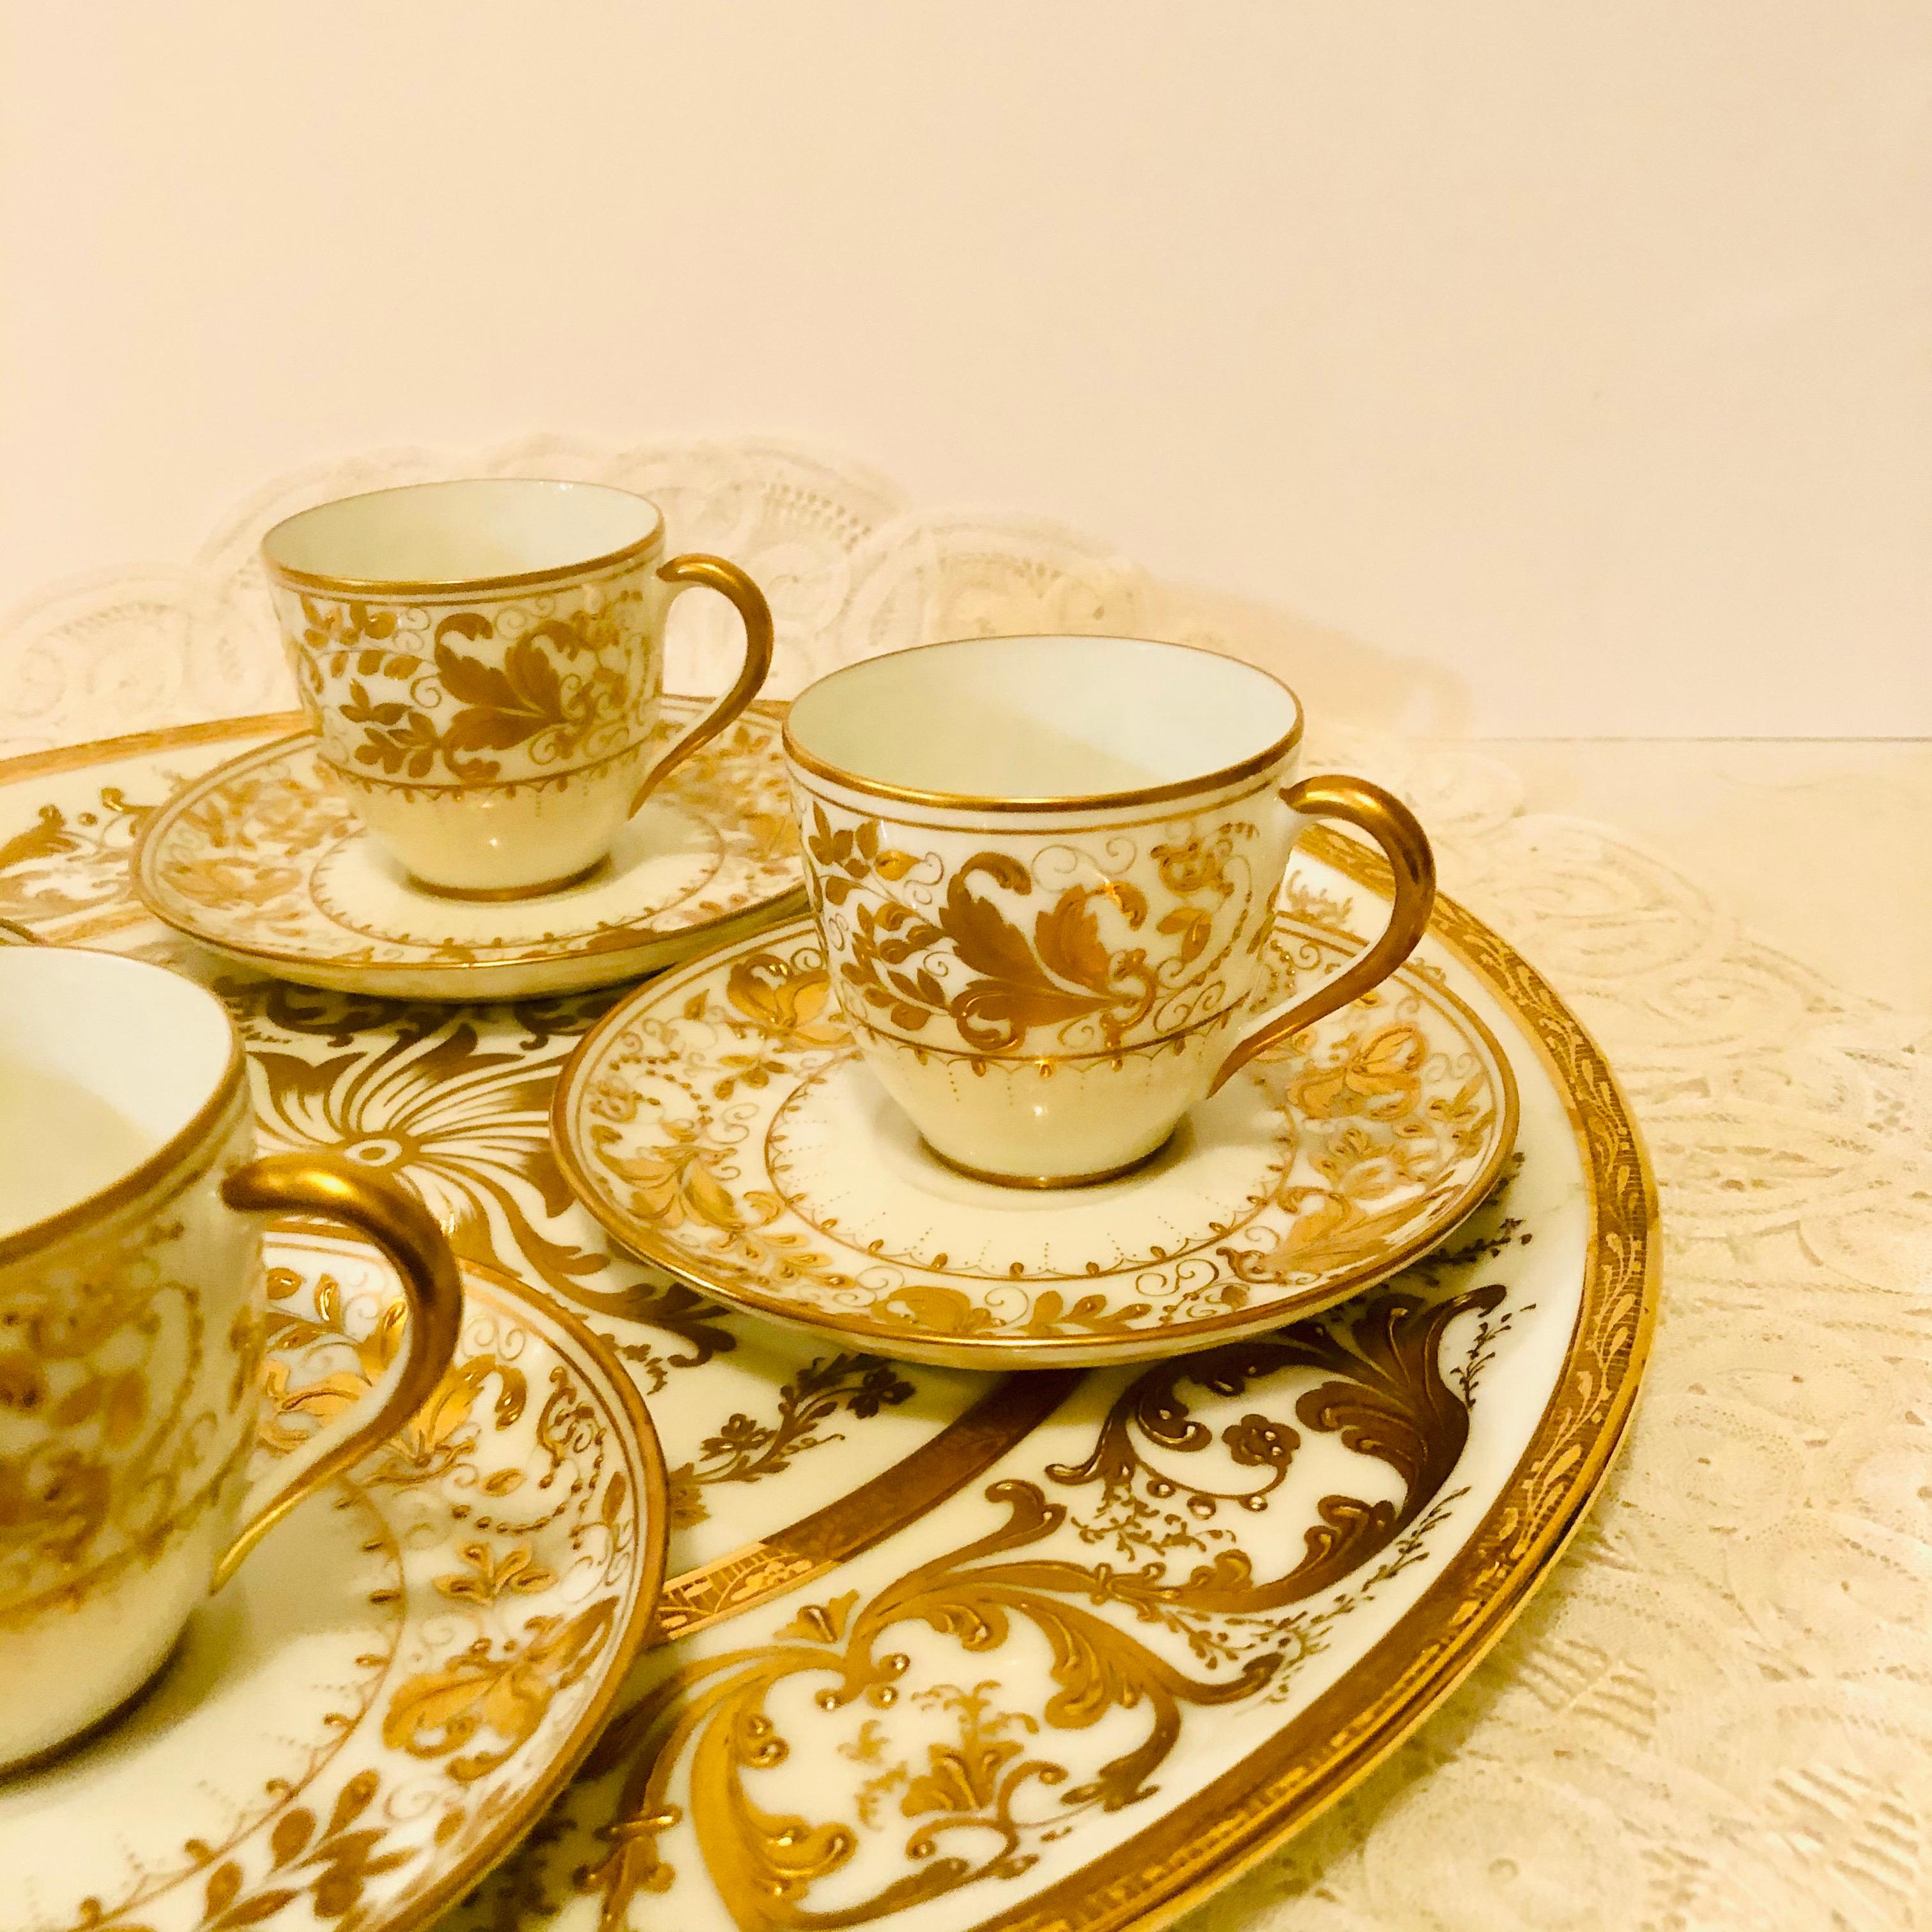 Le Tallec Set of 4 Demitasse Cups and Matching Tray with Profuse Raised Gilding For Sale 1